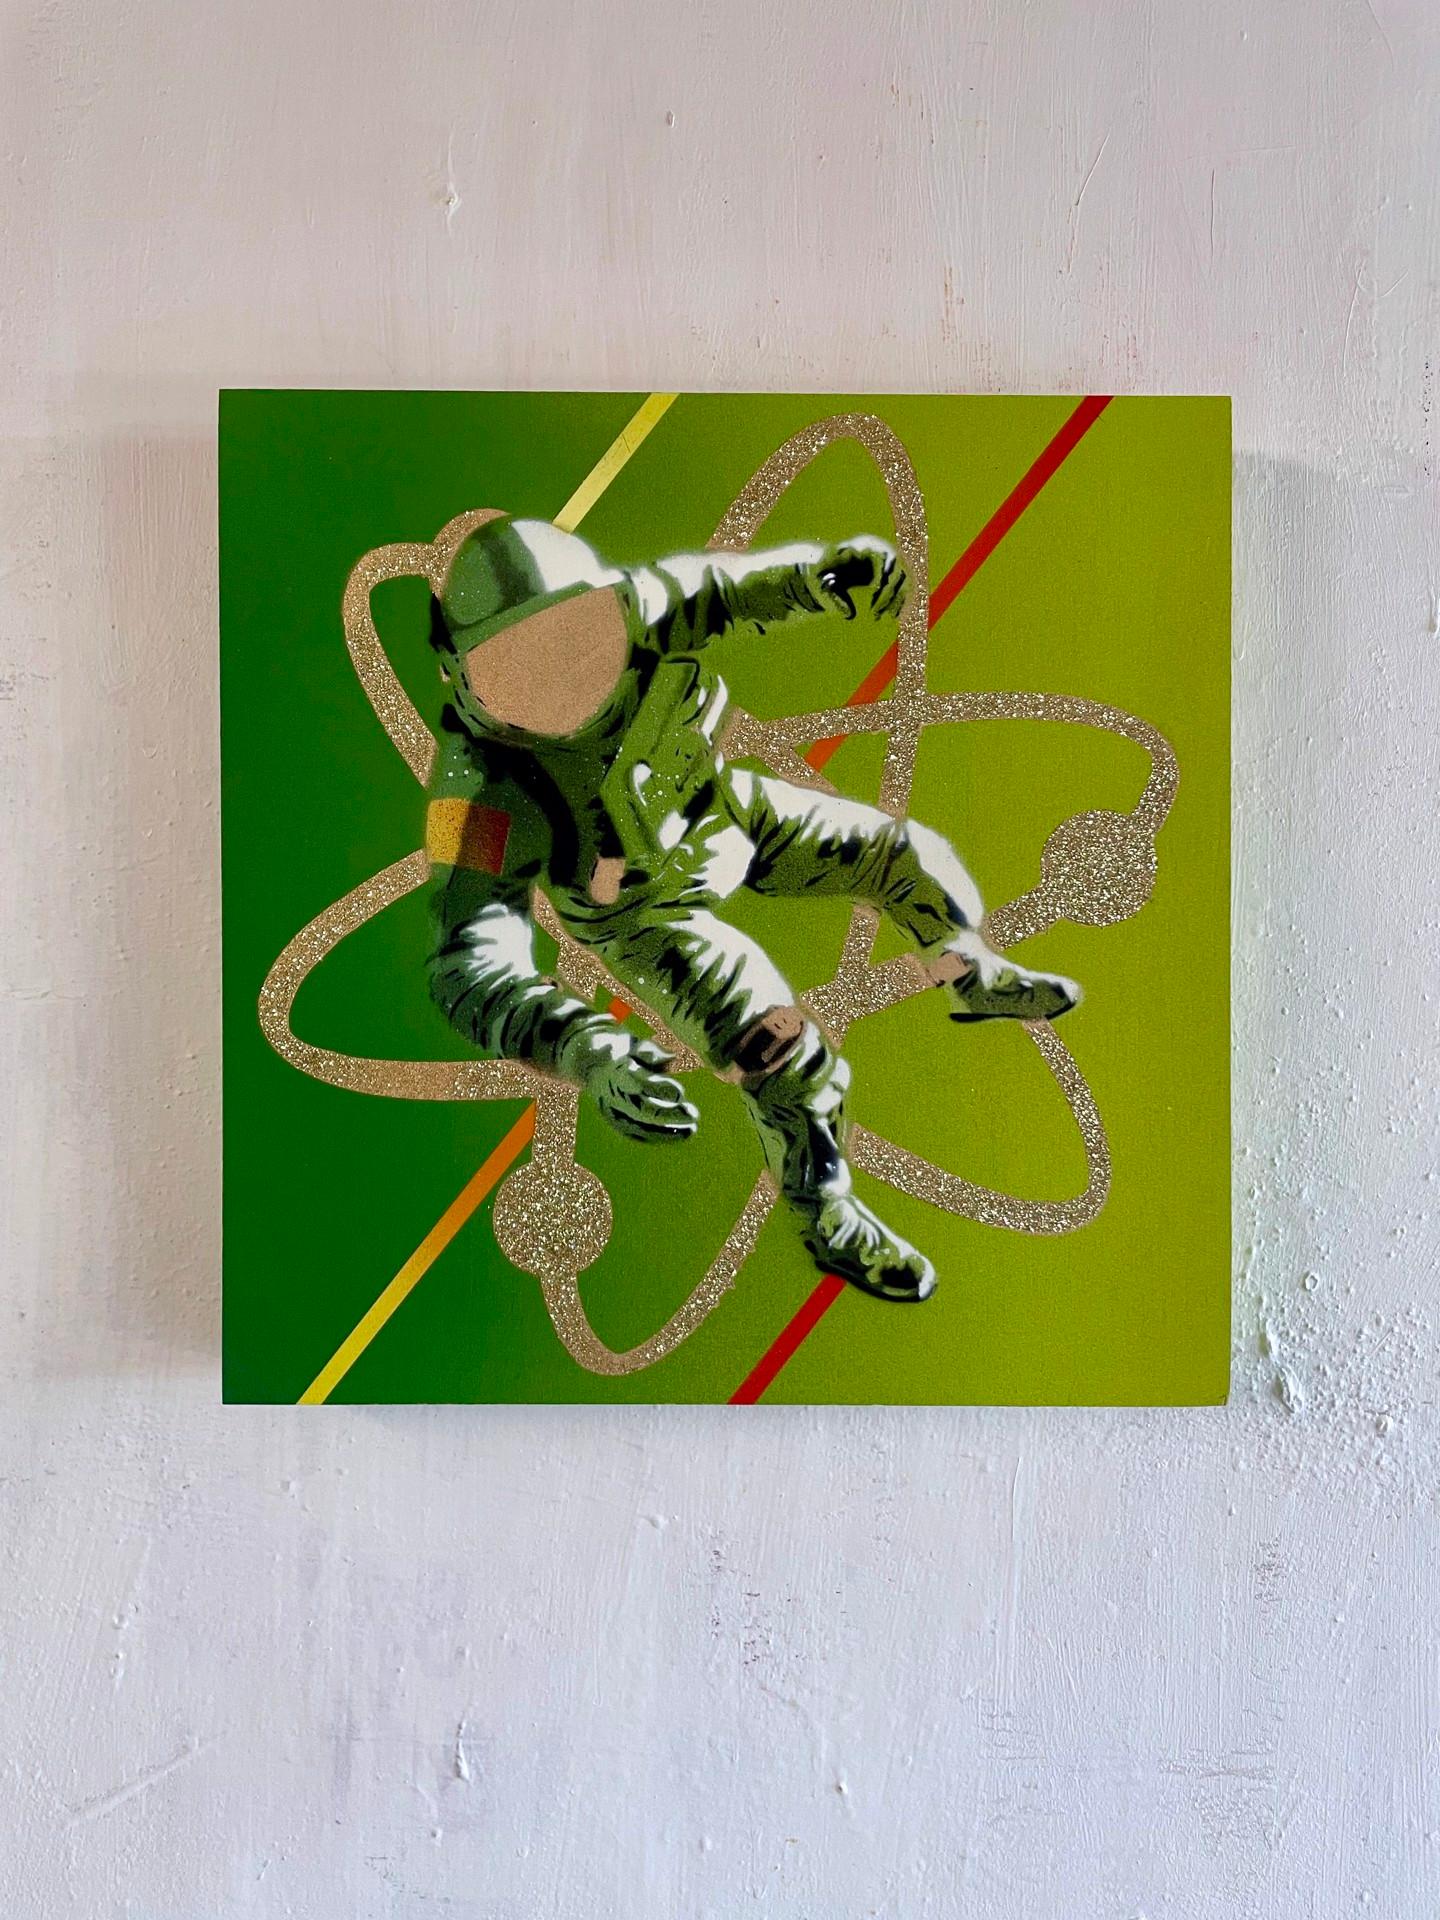 The Return of Saturn - Contemporary Futuristic Space painting (Green+Black) - Painting by Hero